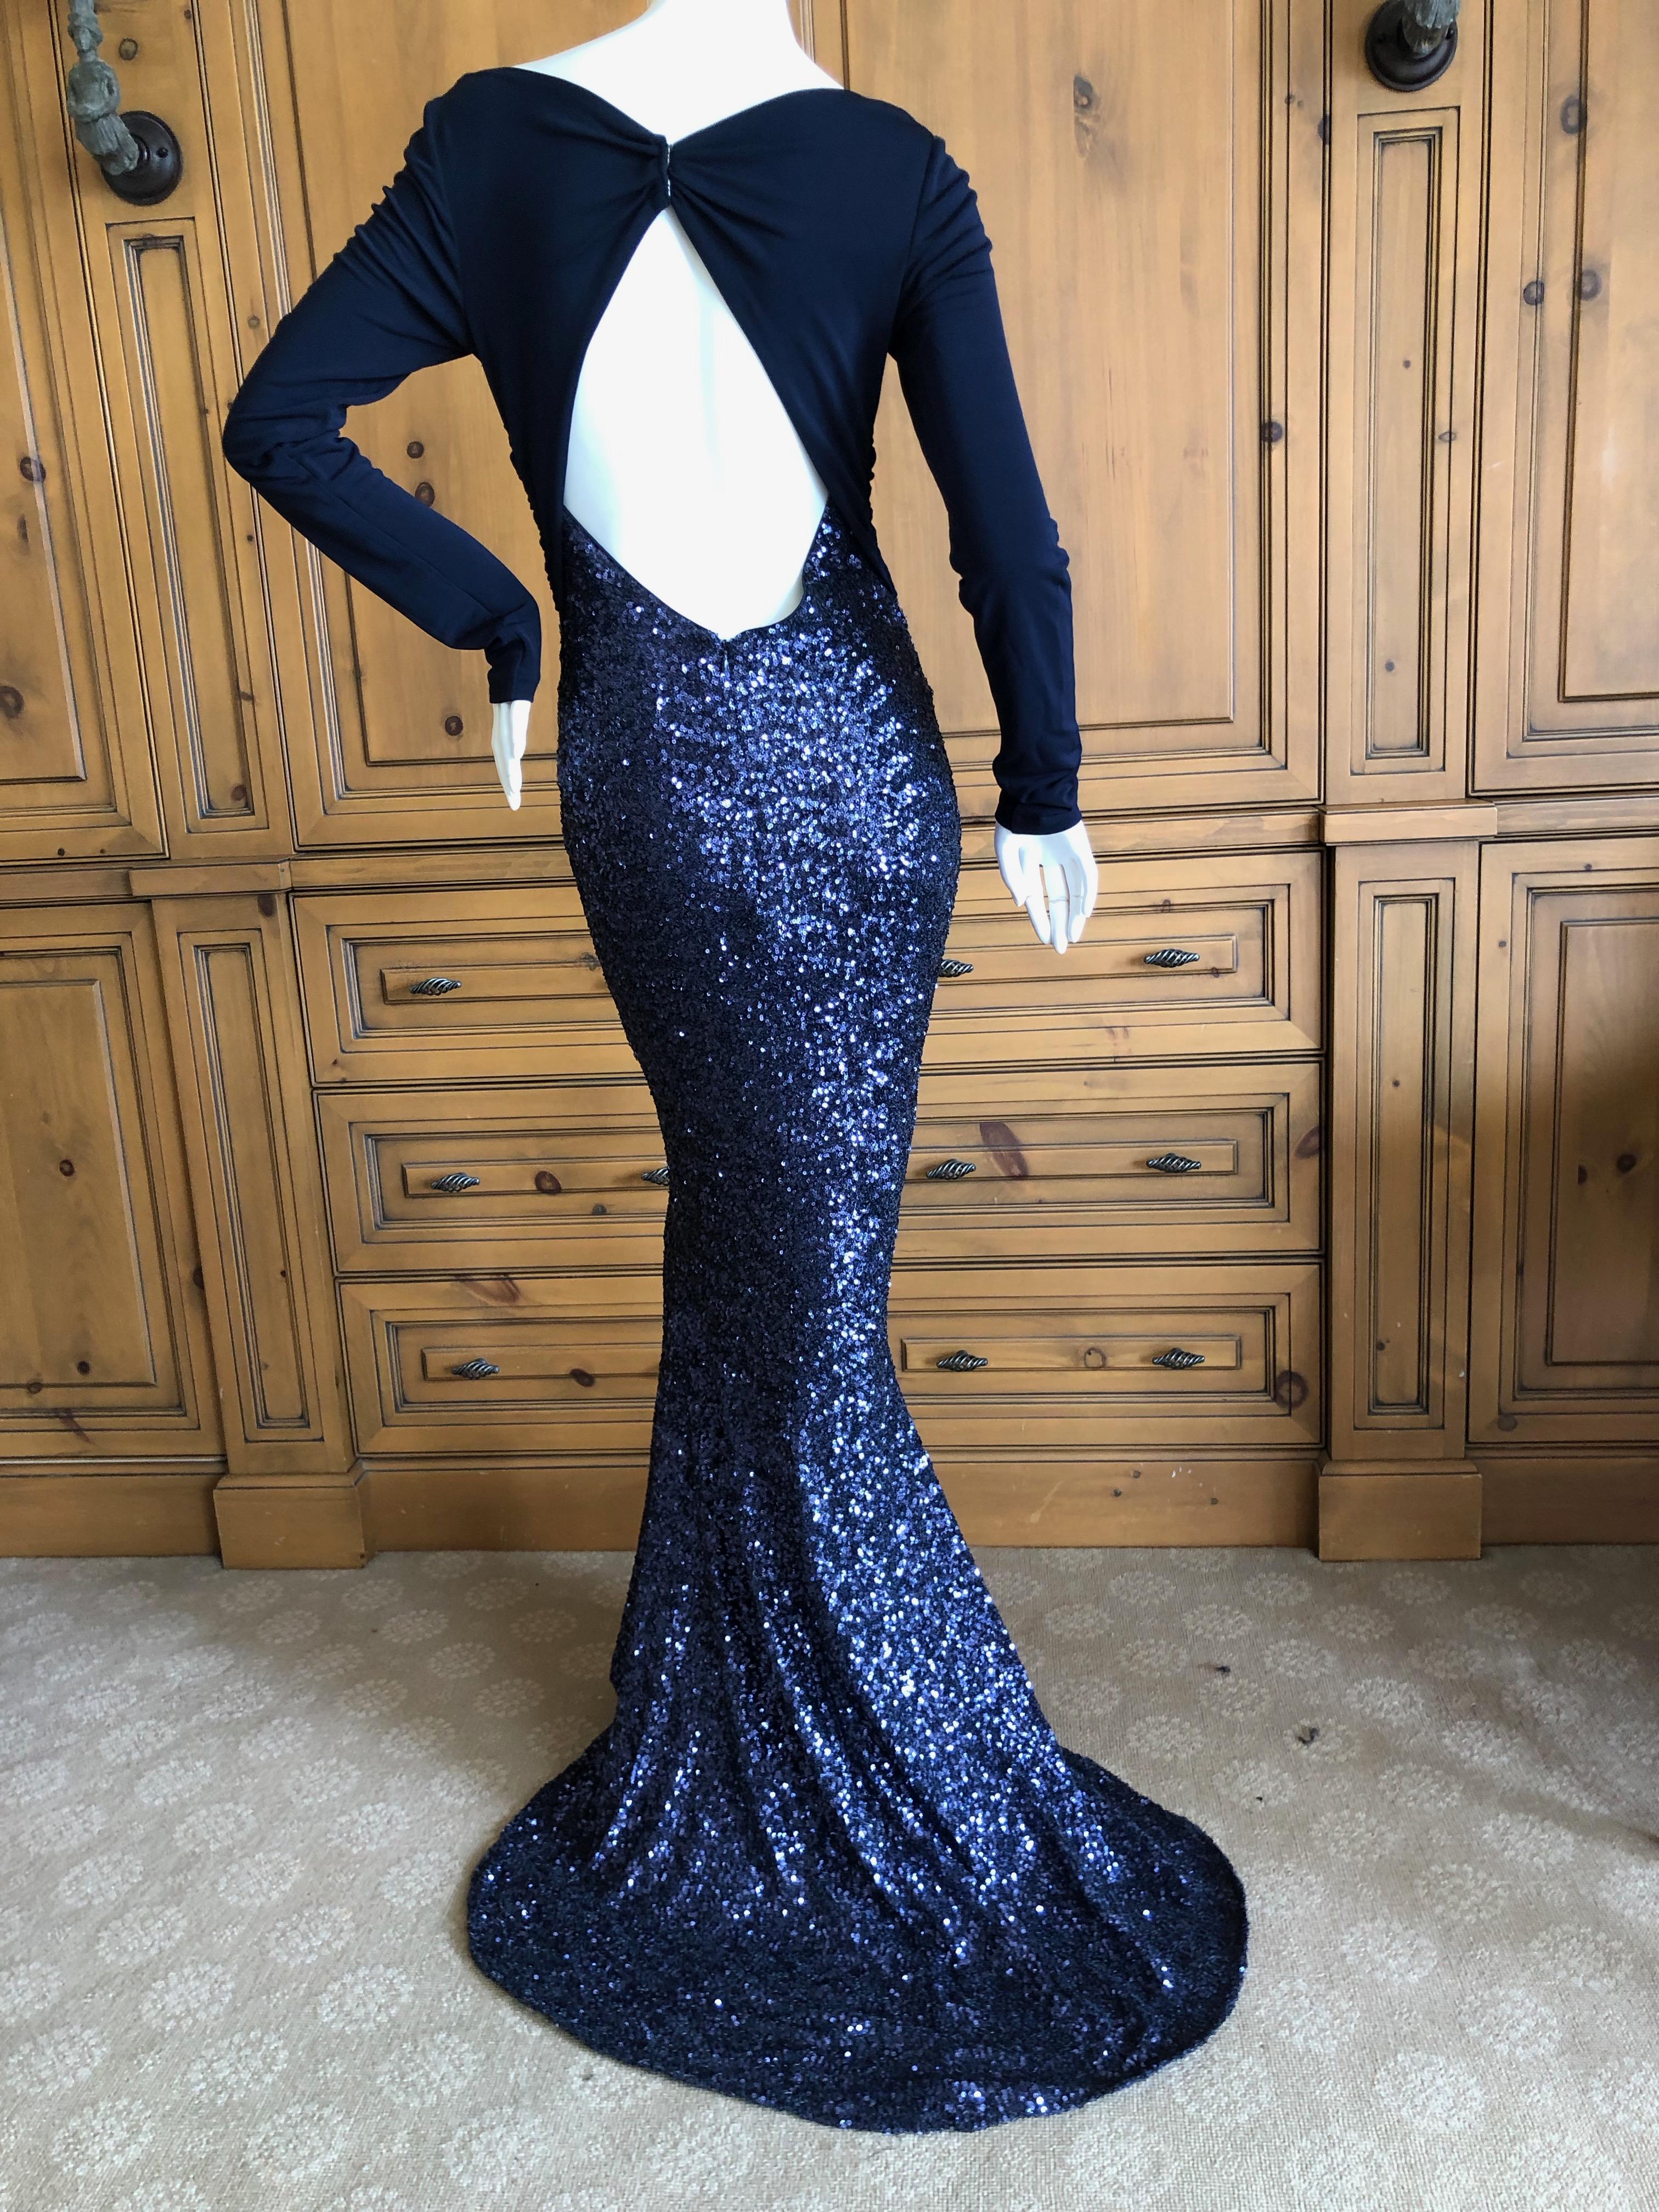 Dolce & Gabbana D&G Navy Blue Low Cut Silk Sequin Evening Gown w Keyhole Back 42 For Sale 3